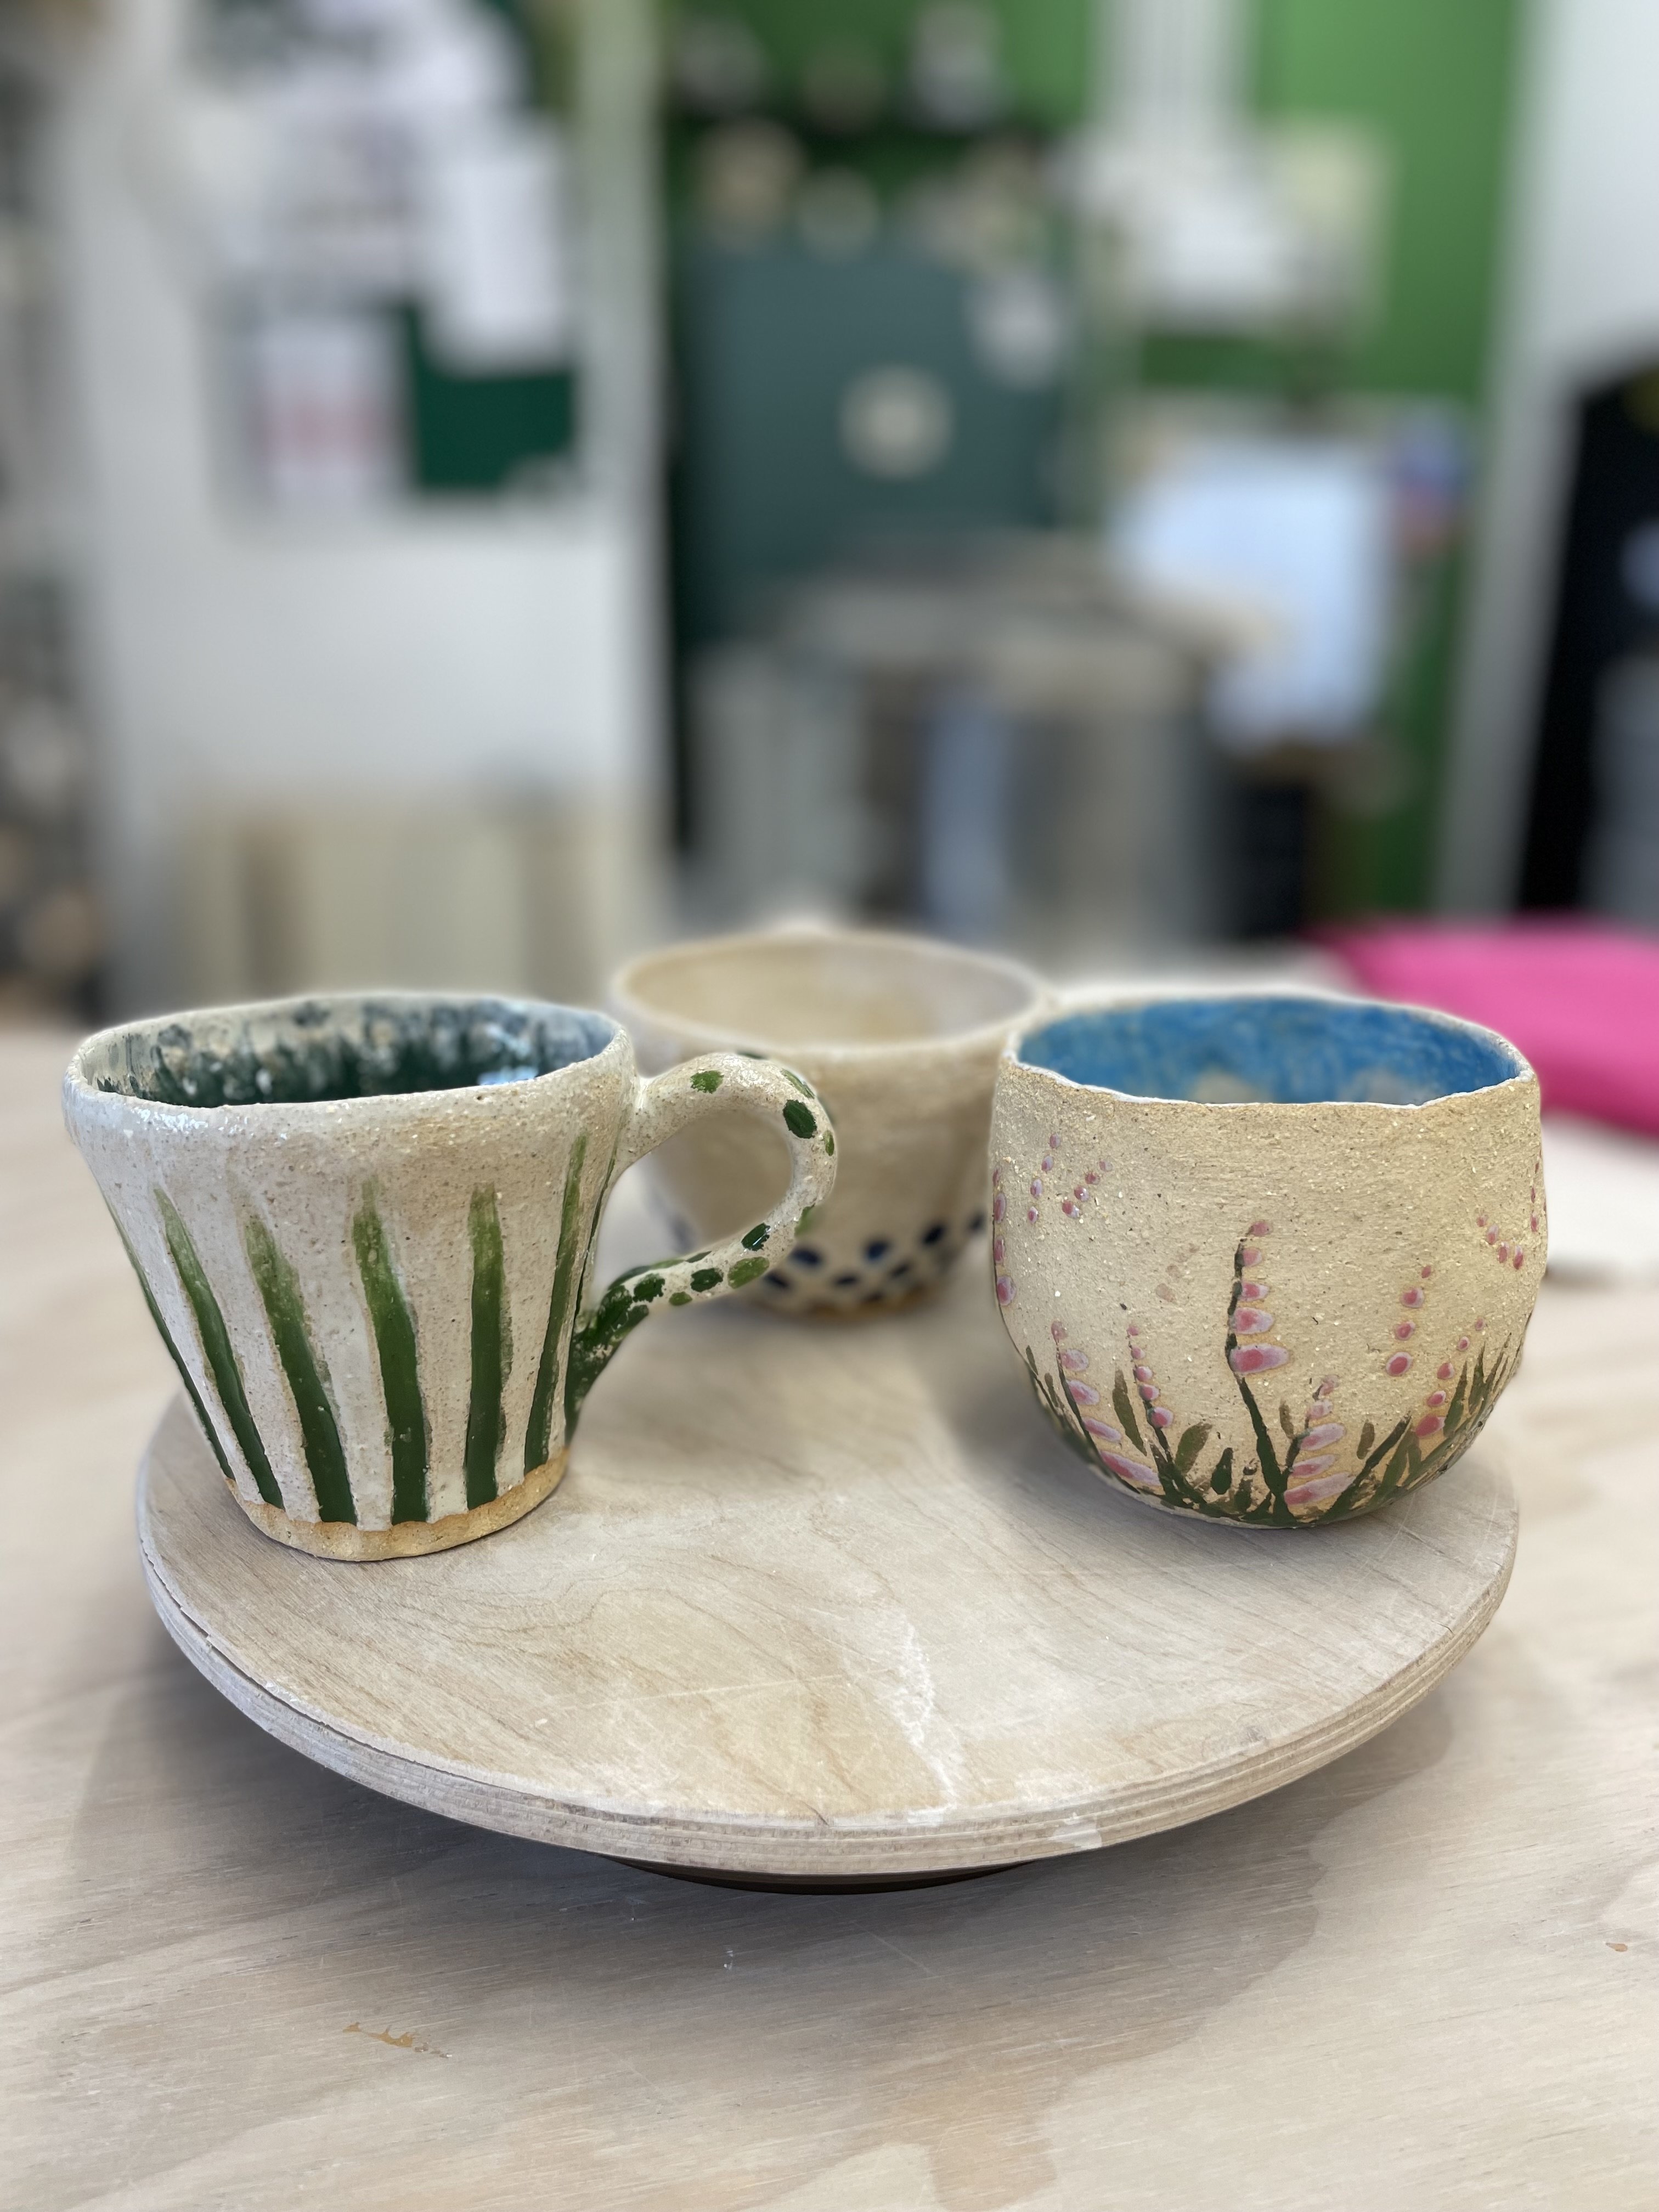 Beginners 6 week Pottery Course